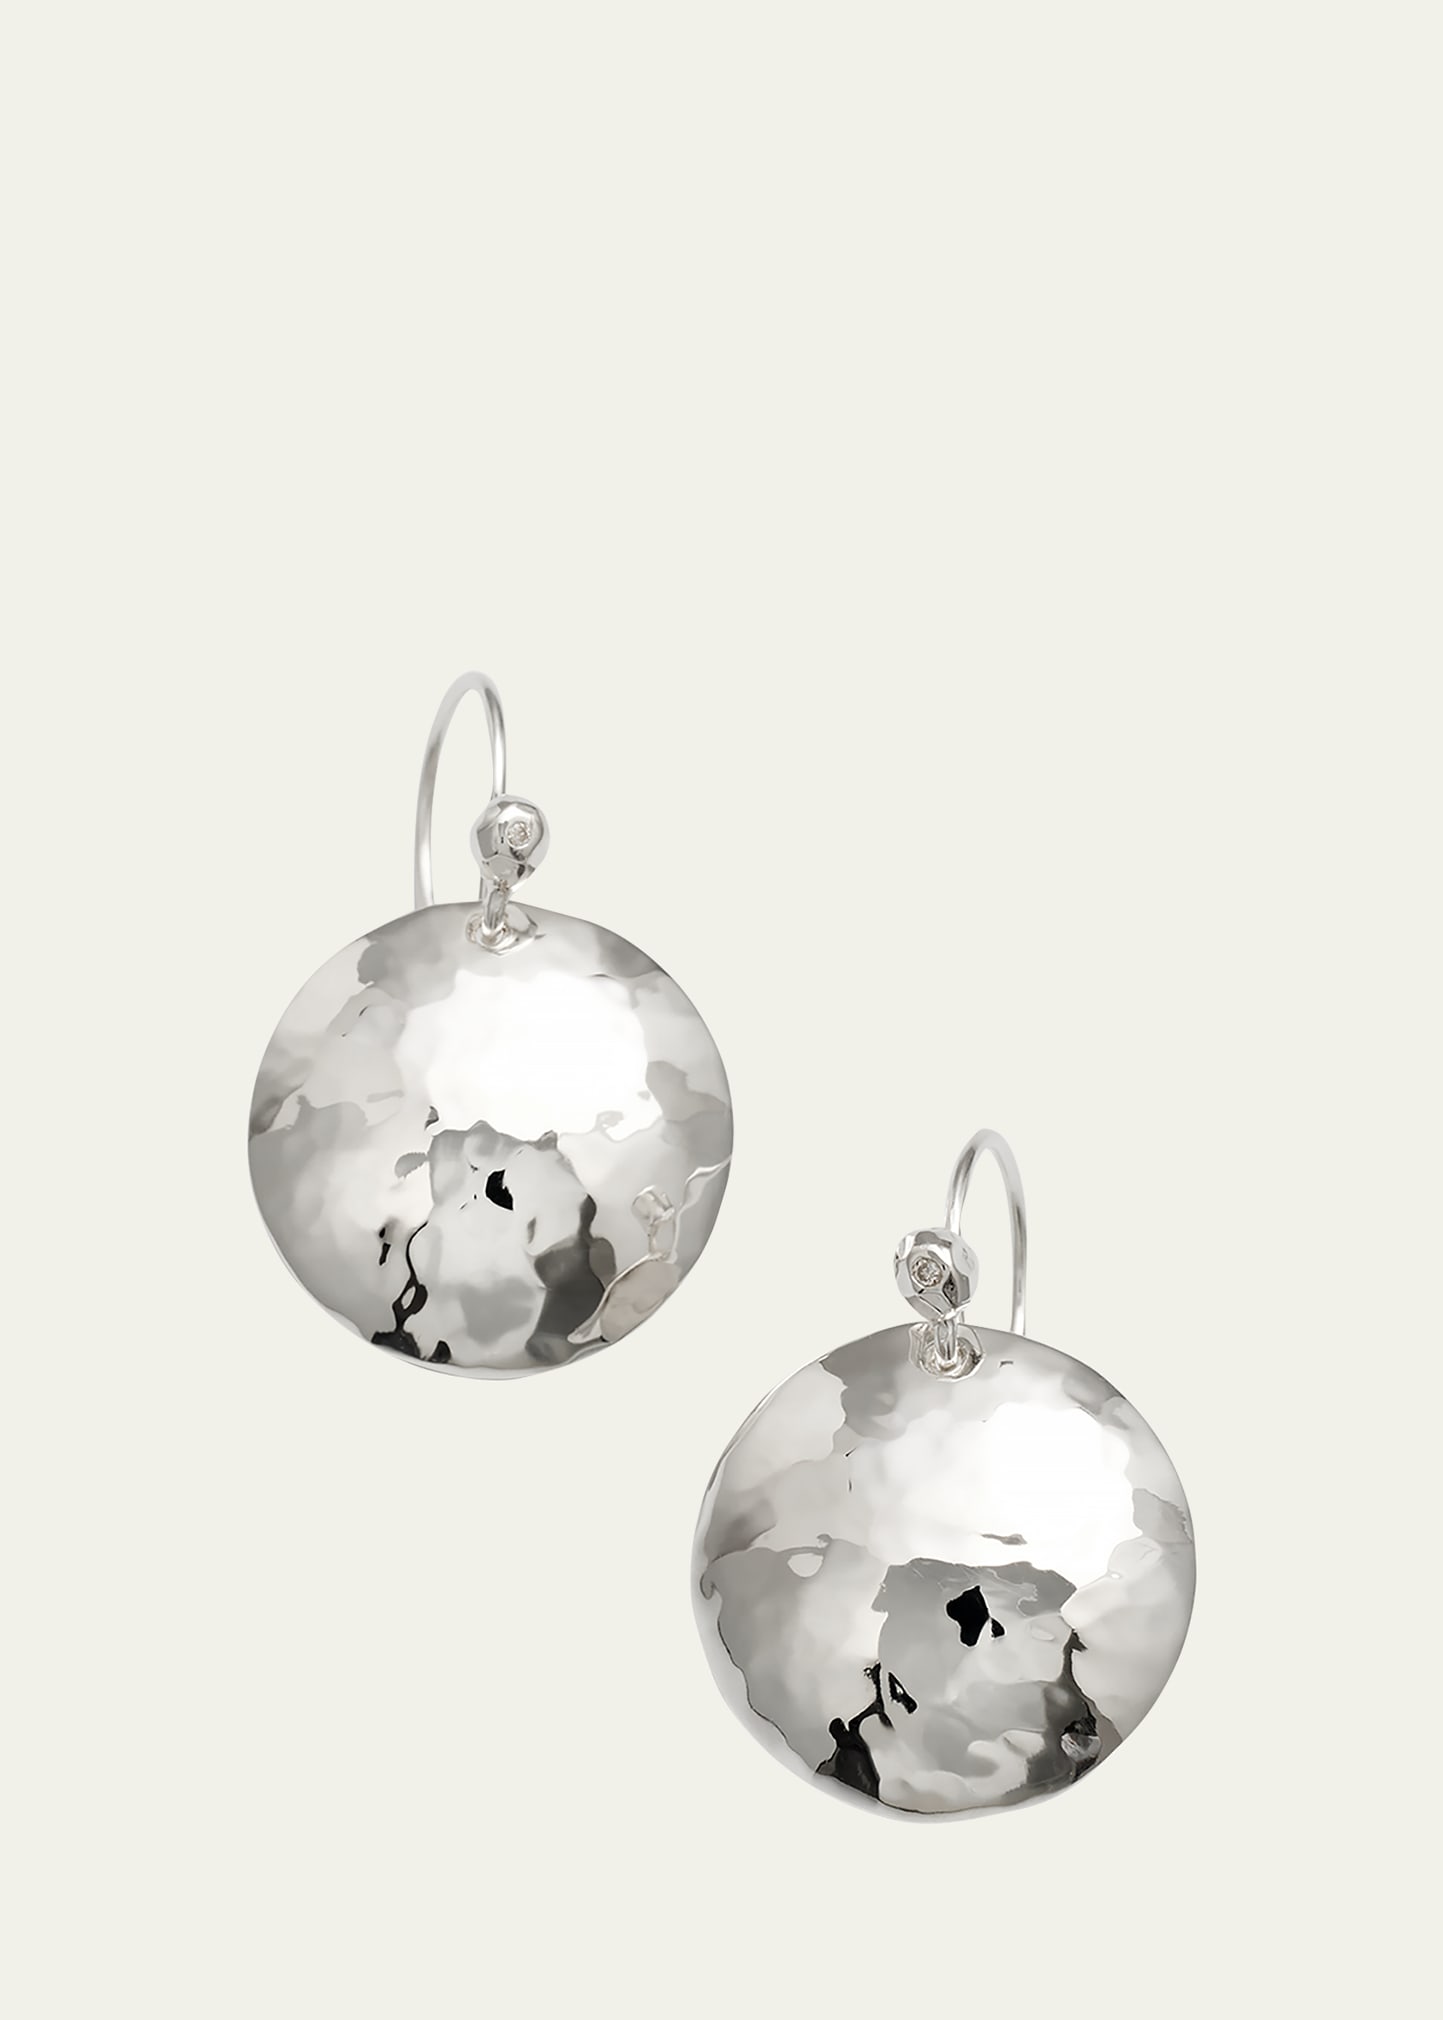 Disc Earrings in Sterling SIlver with Diamonds